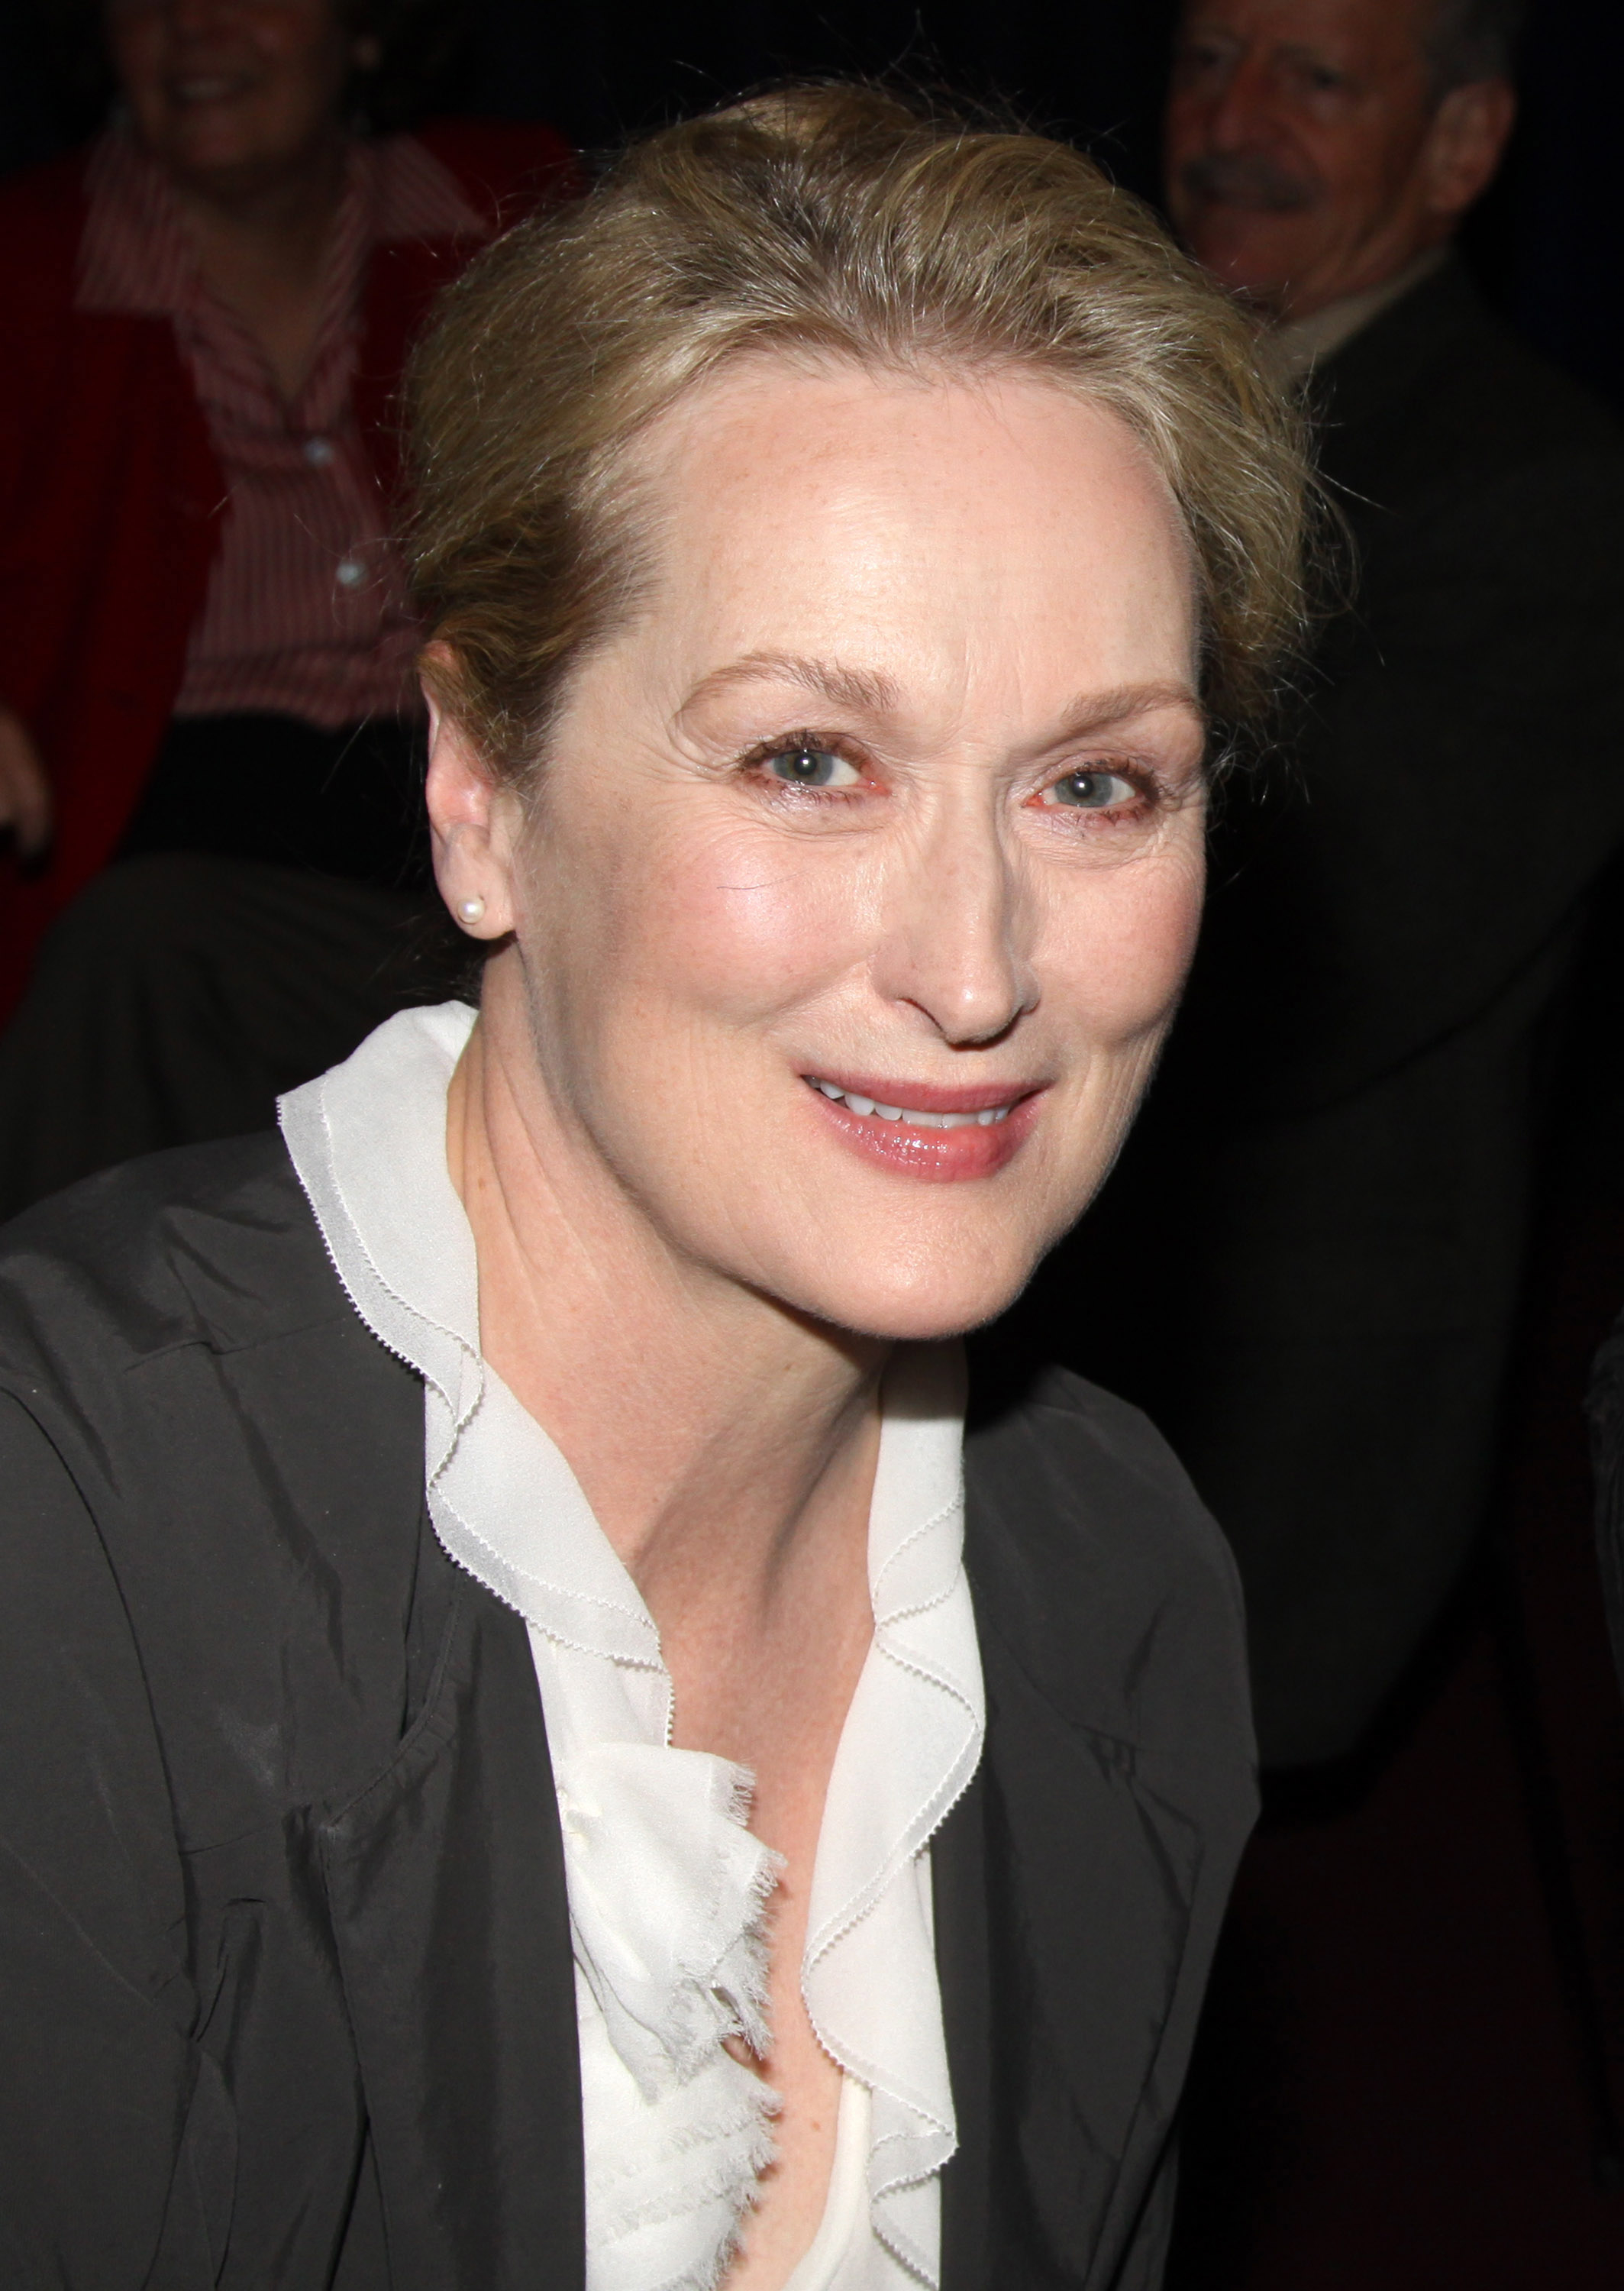 Close-up of Meryl smiling in a frilly blouse and jacket